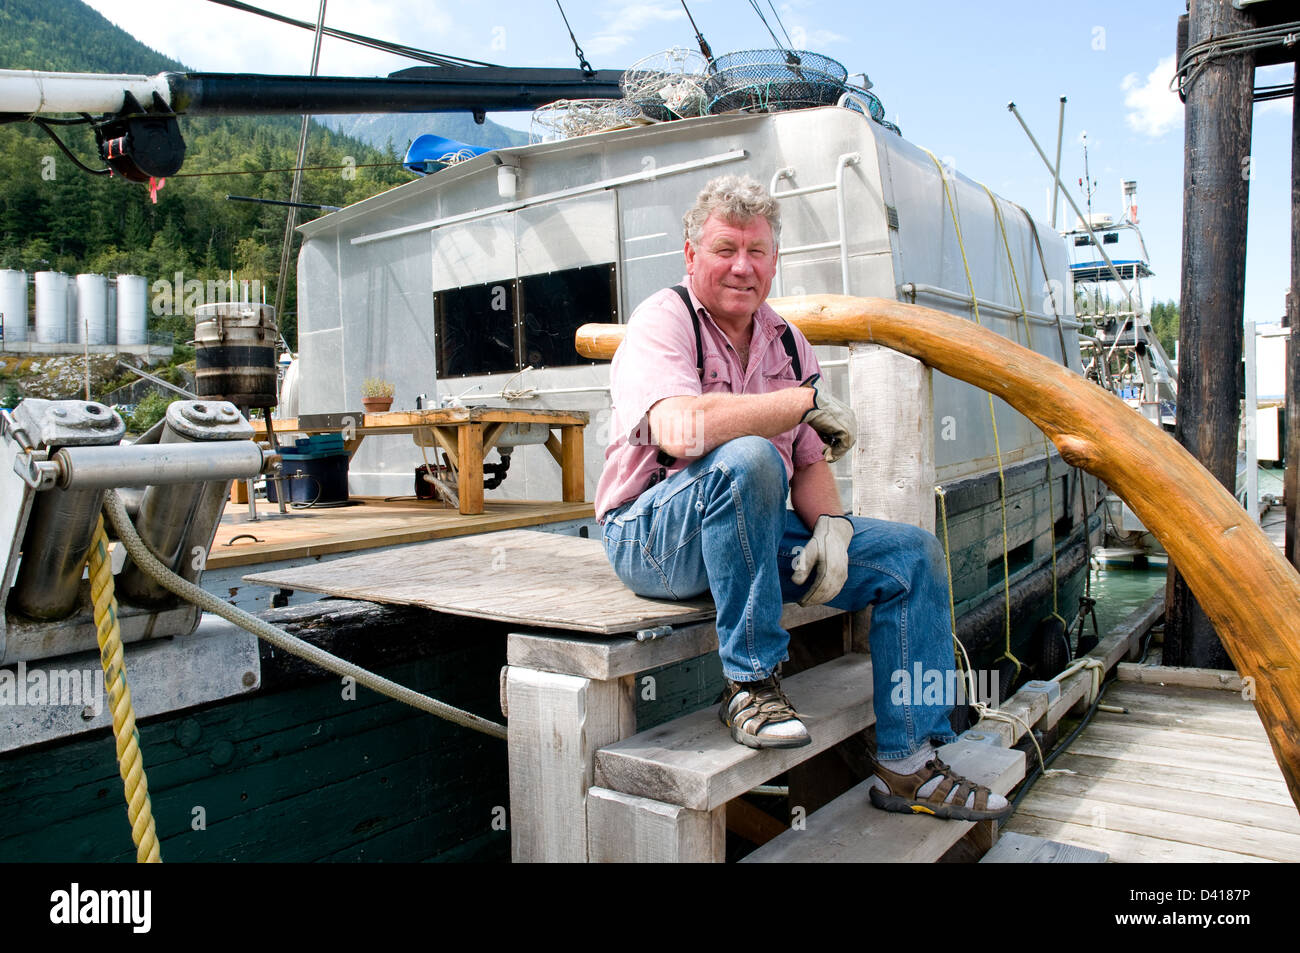 A resident of Bella Coola, sitting on his boat in the town's marina, in the Great Bear Rainforest, British Columbia, Canada. Stock Photo